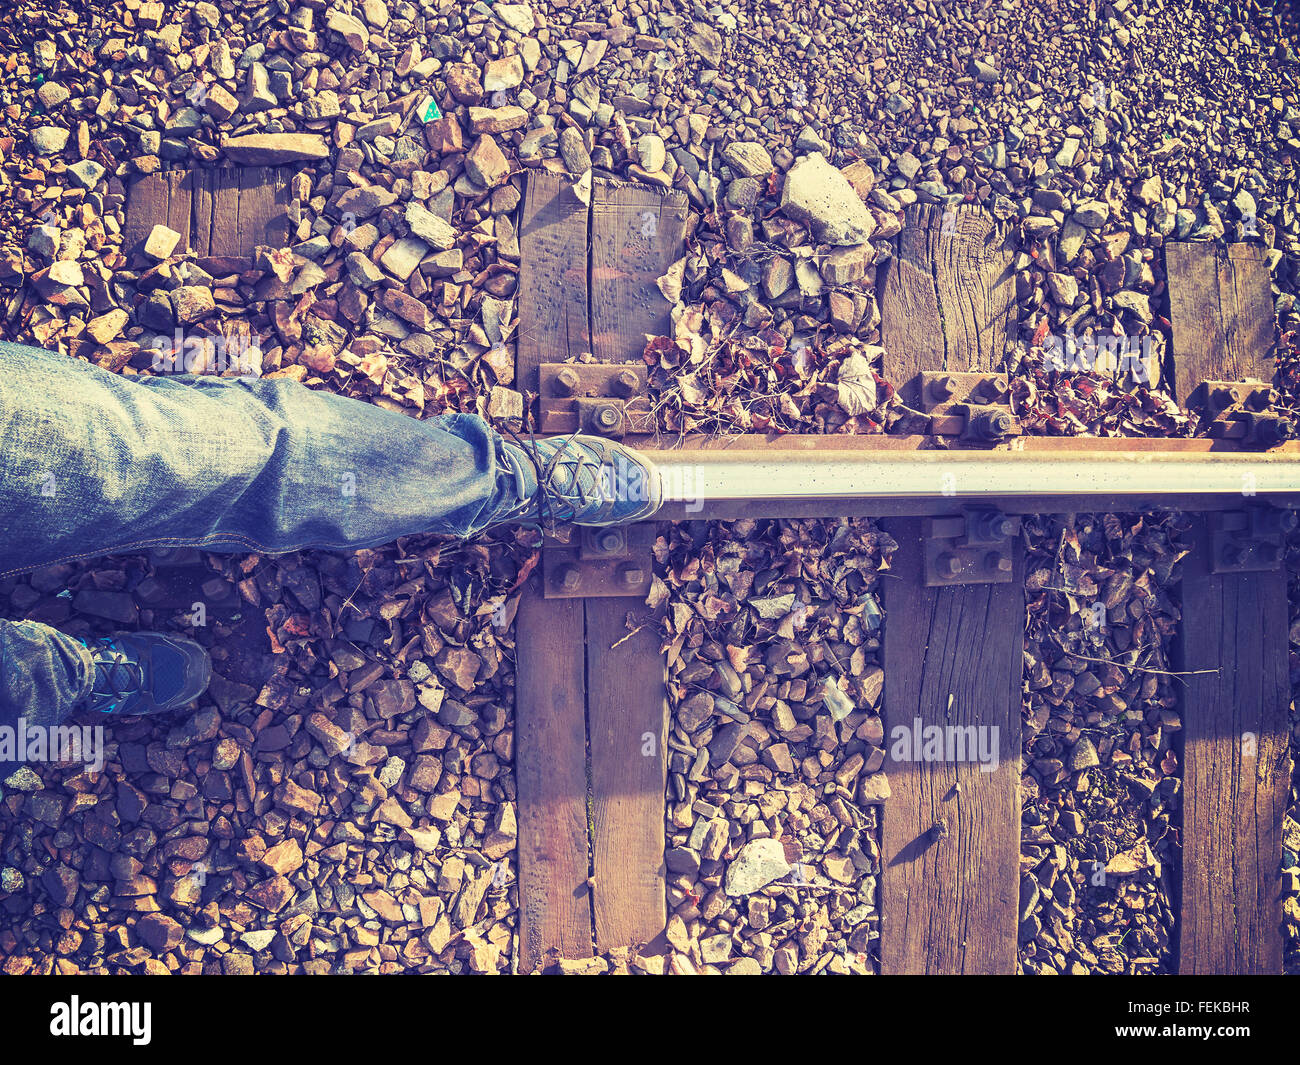 Vintage stylized legs walking on rail track, concept picture. Stock Photo